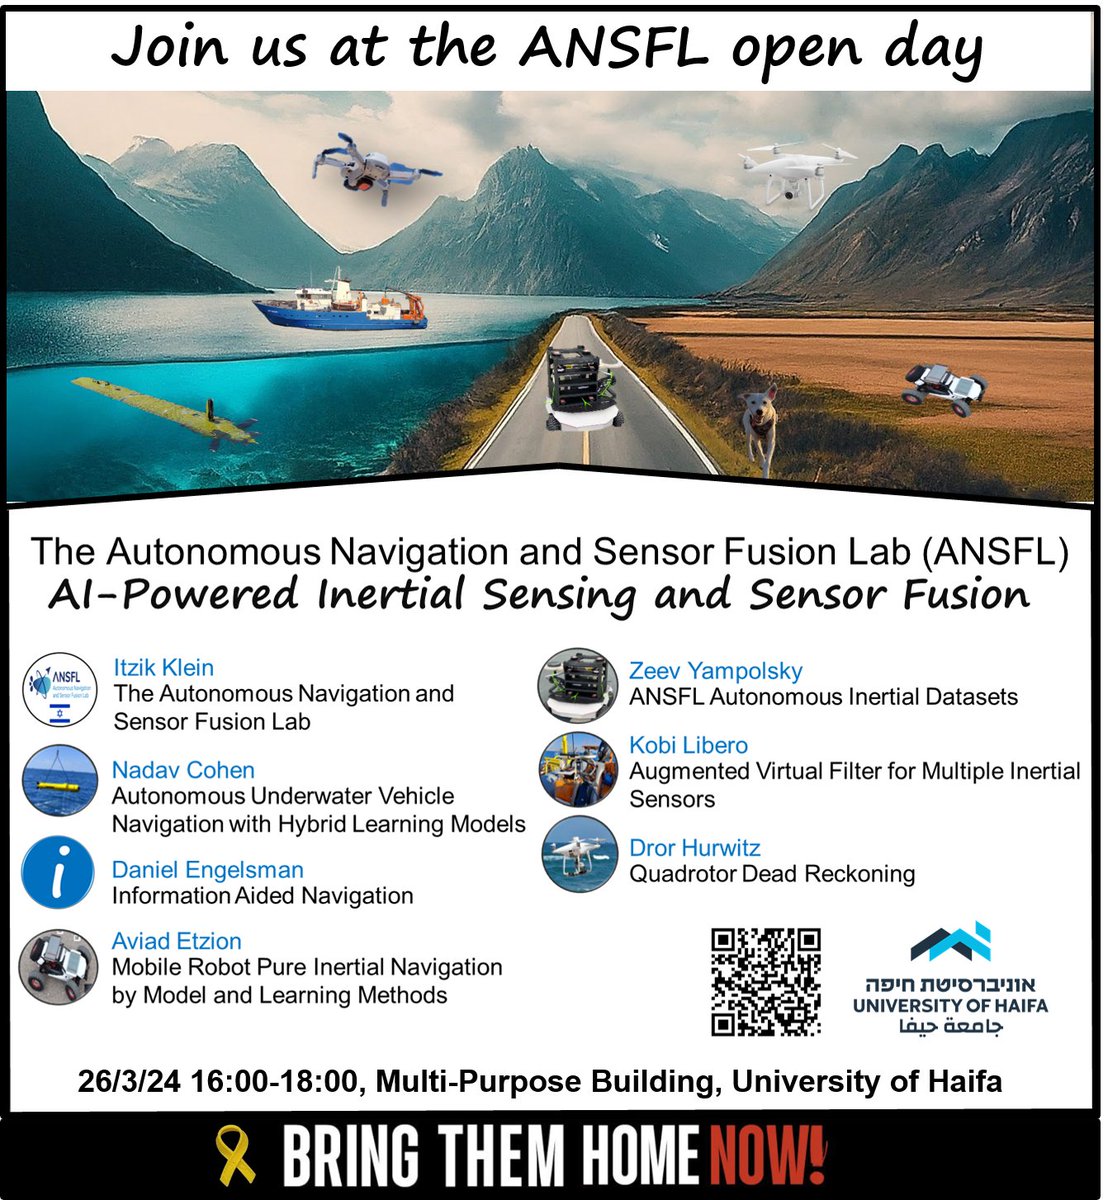 Join the Autonomous Navigation and Sensor Fusion Lab (ANSFL) Open Day ! We'll showcase our research on AI-powered inertial sensing and sensor fusion for various navigation challenges. Register here >> bit.ly/3IrEPCR